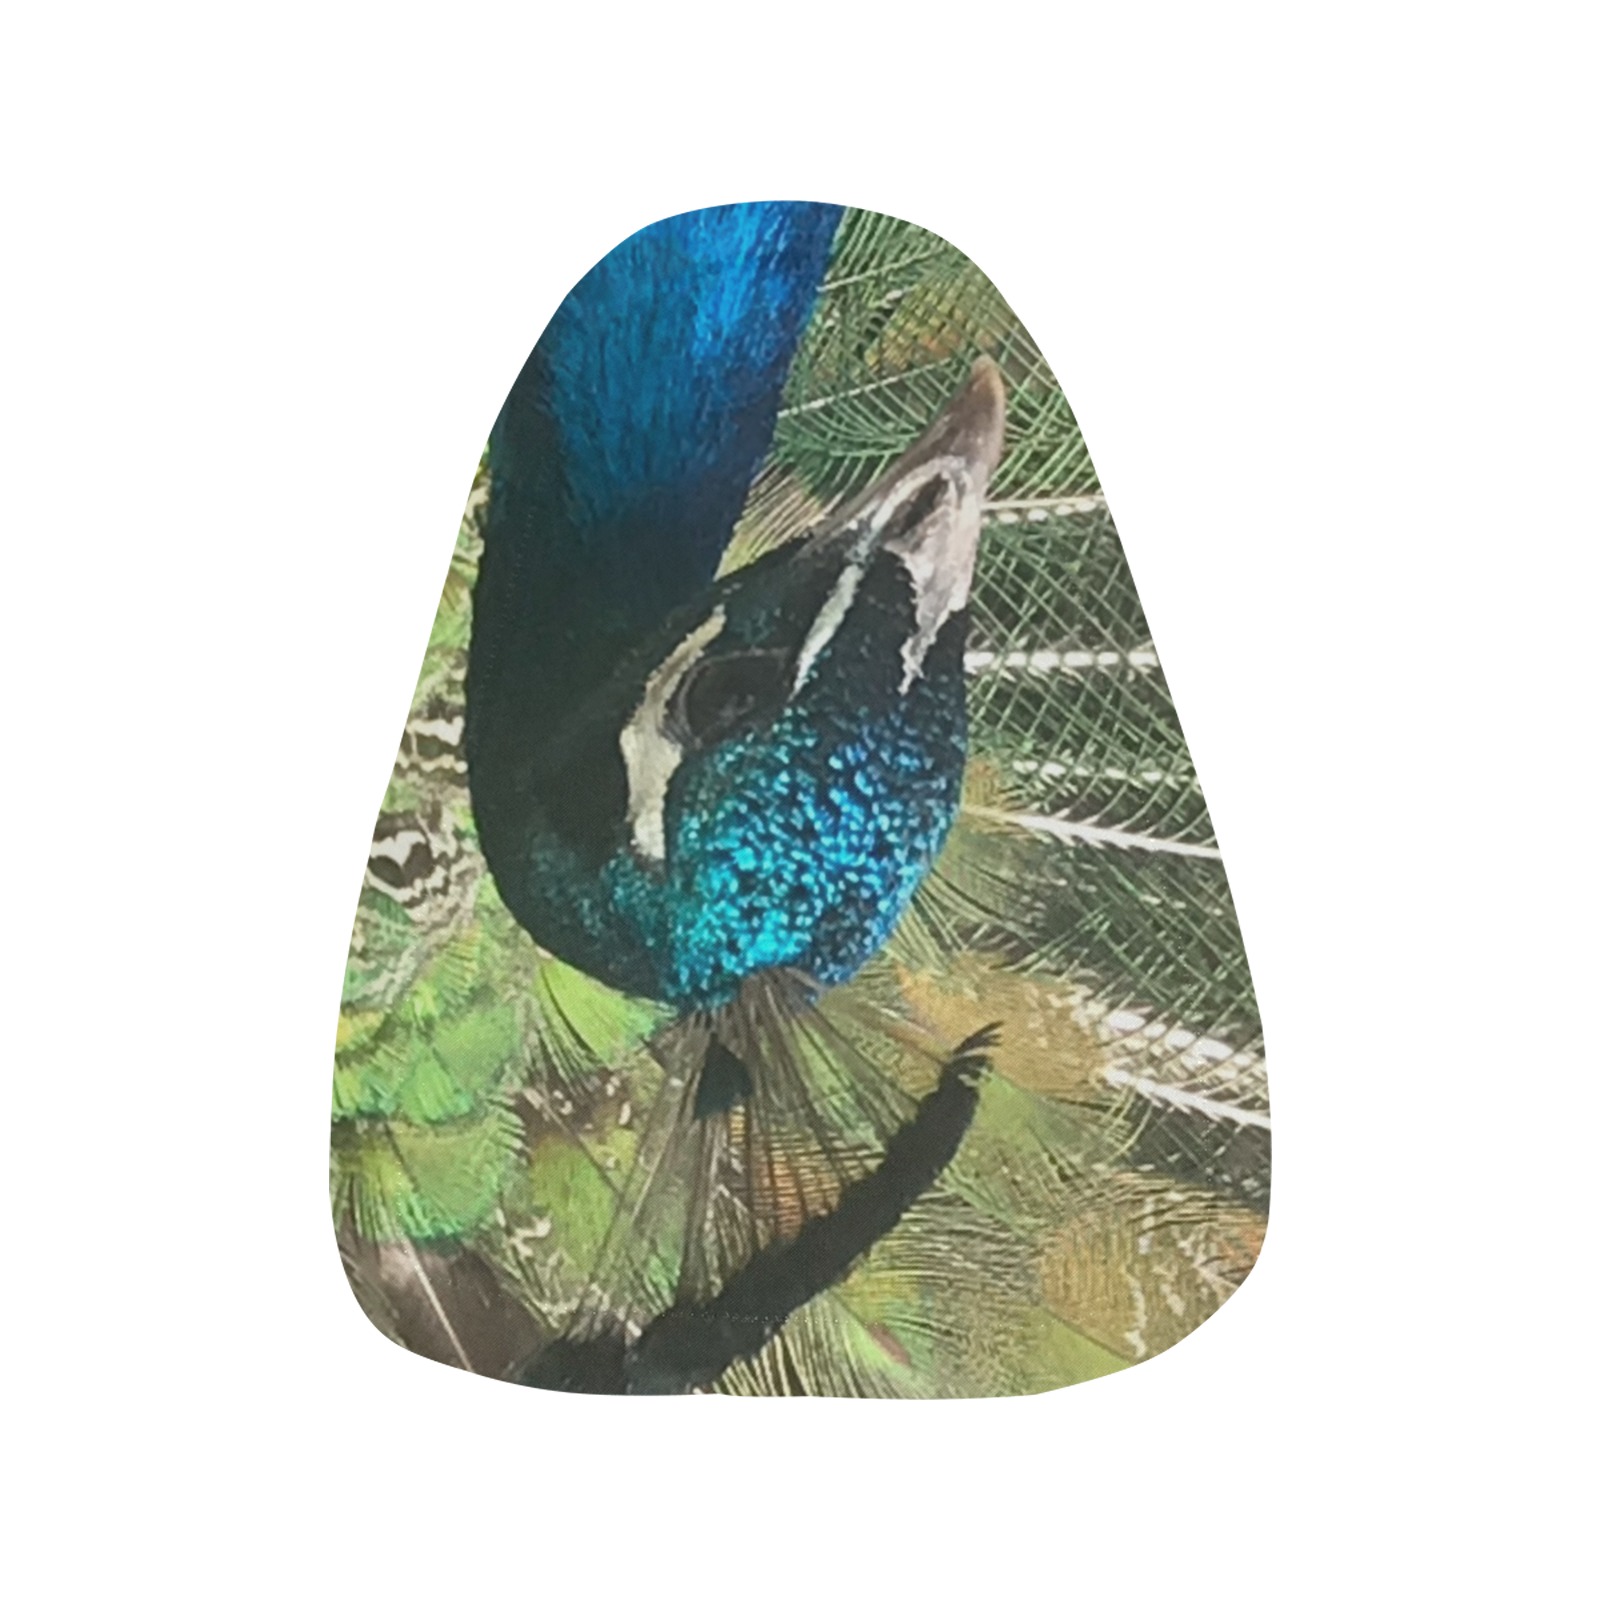 Emperor The Peacock Waterproof Bicycle Seat Cover